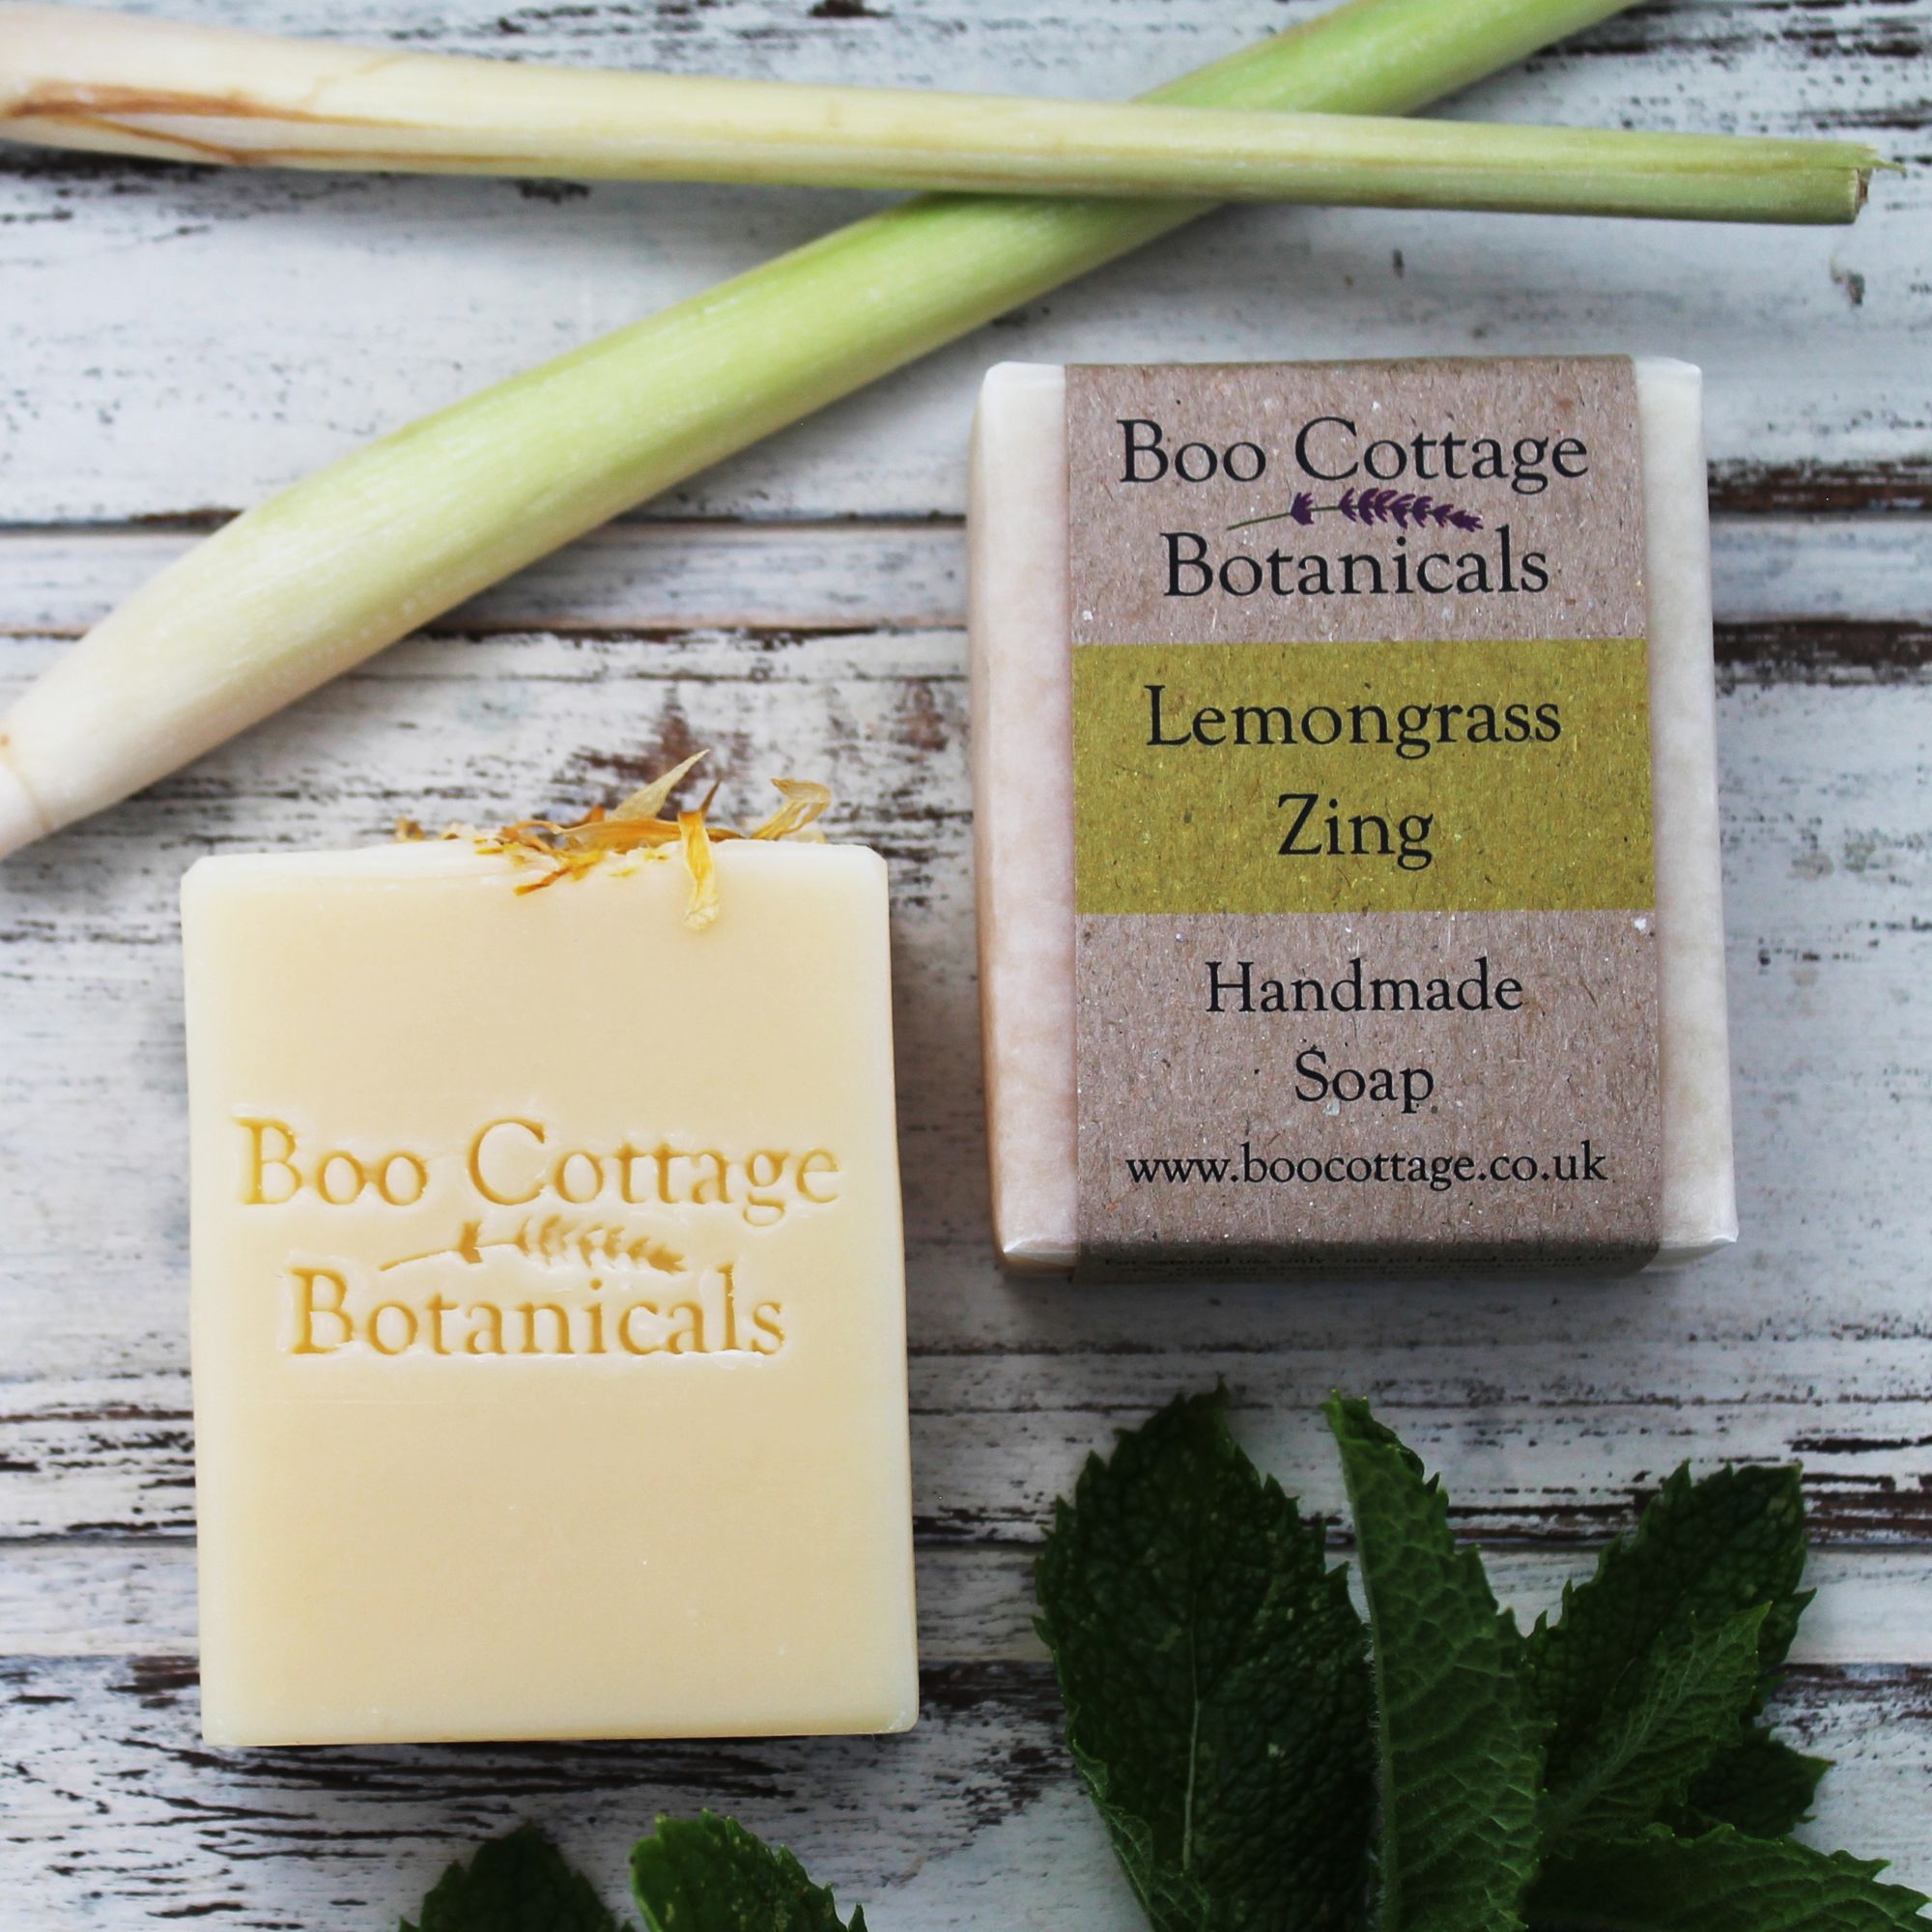 Yellow unwrapped bar of soap next to wrapped bar with lemongrass above